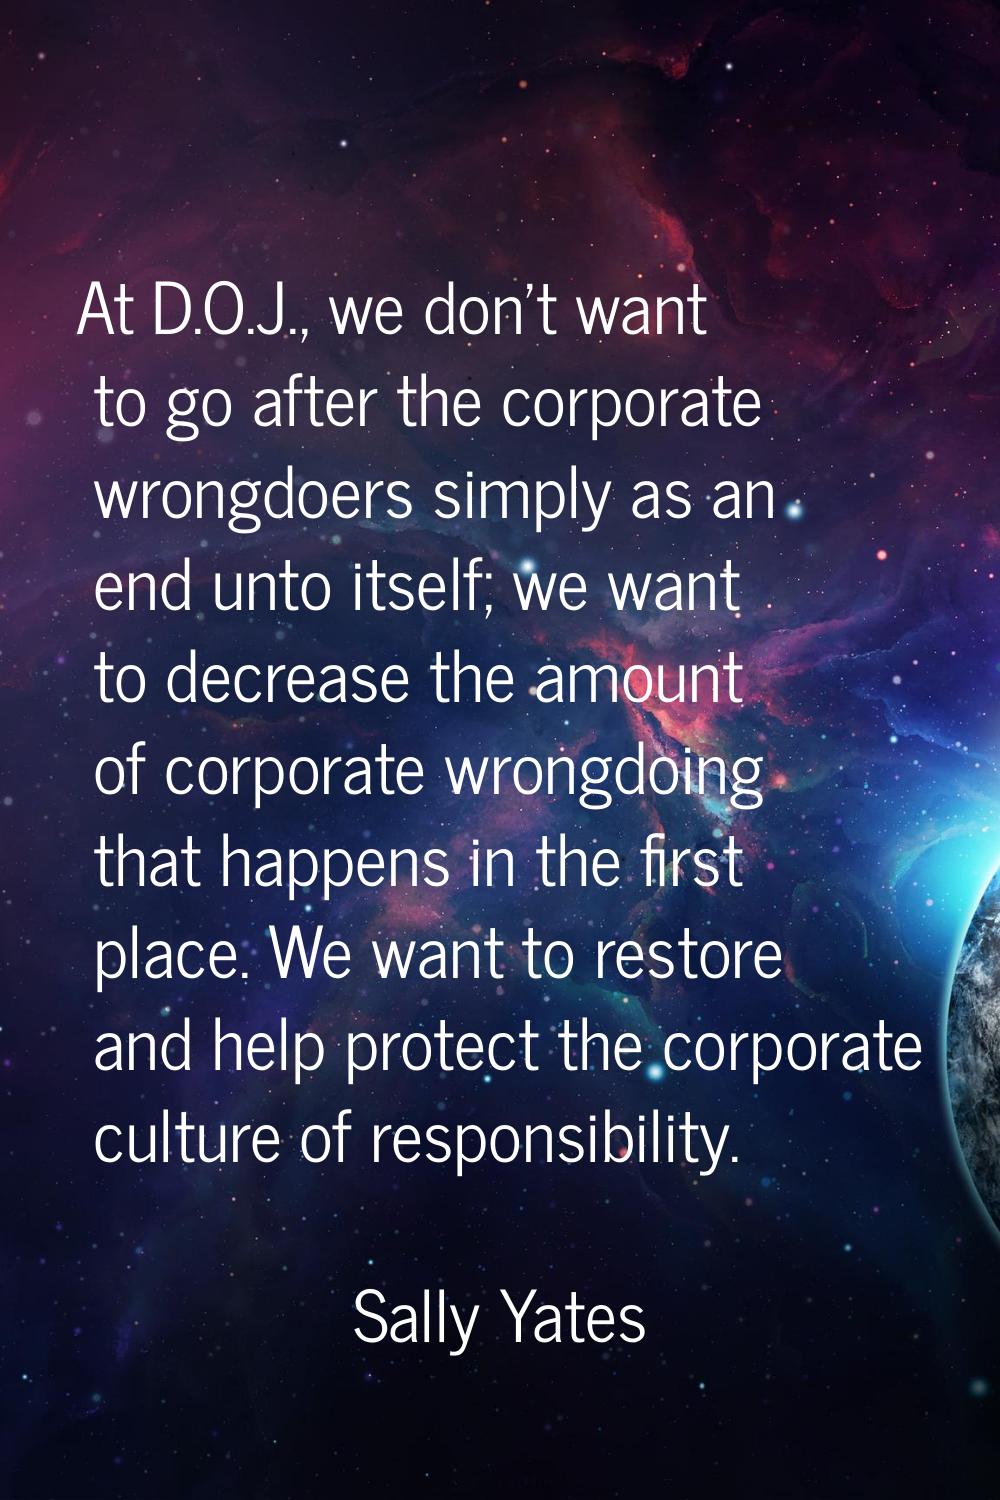 At D.O.J., we don't want to go after the corporate wrongdoers simply as an end unto itself; we want